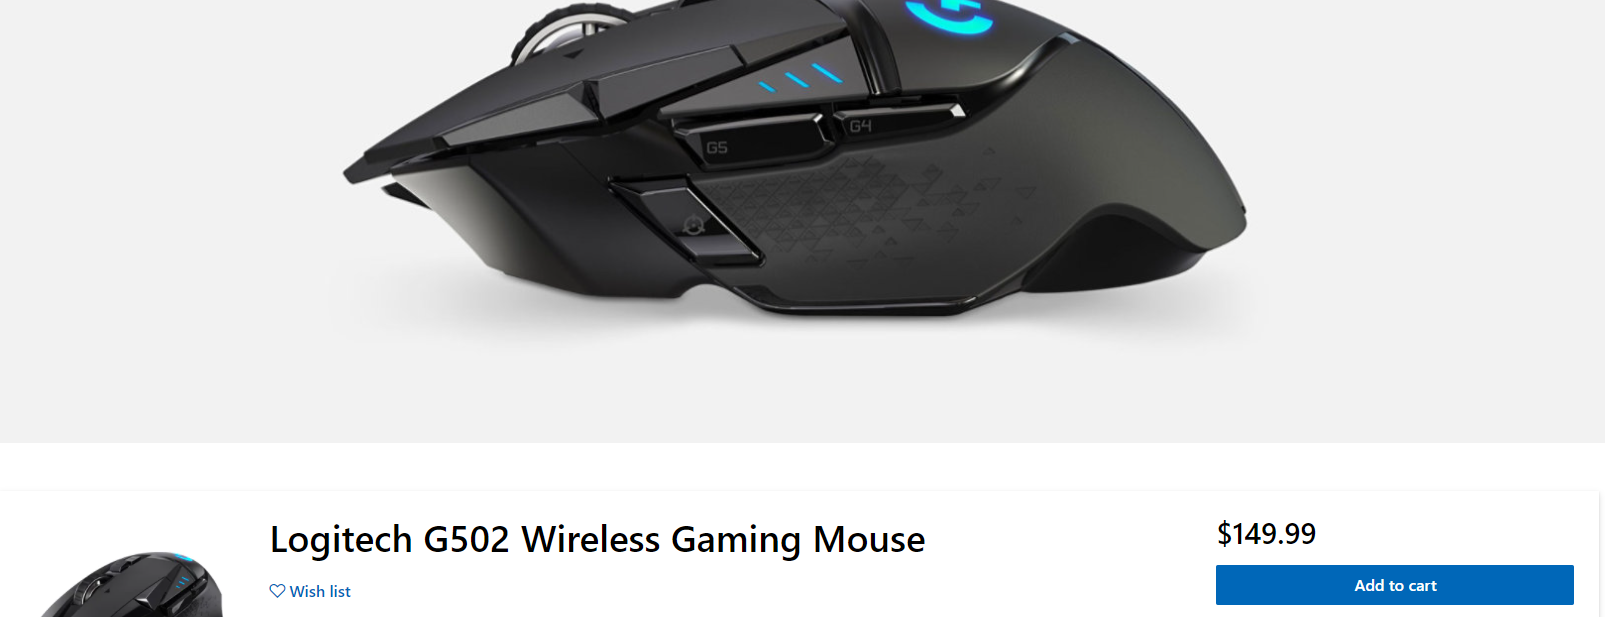 Logitech launches G502 Lightspeed wireless gaming mouse